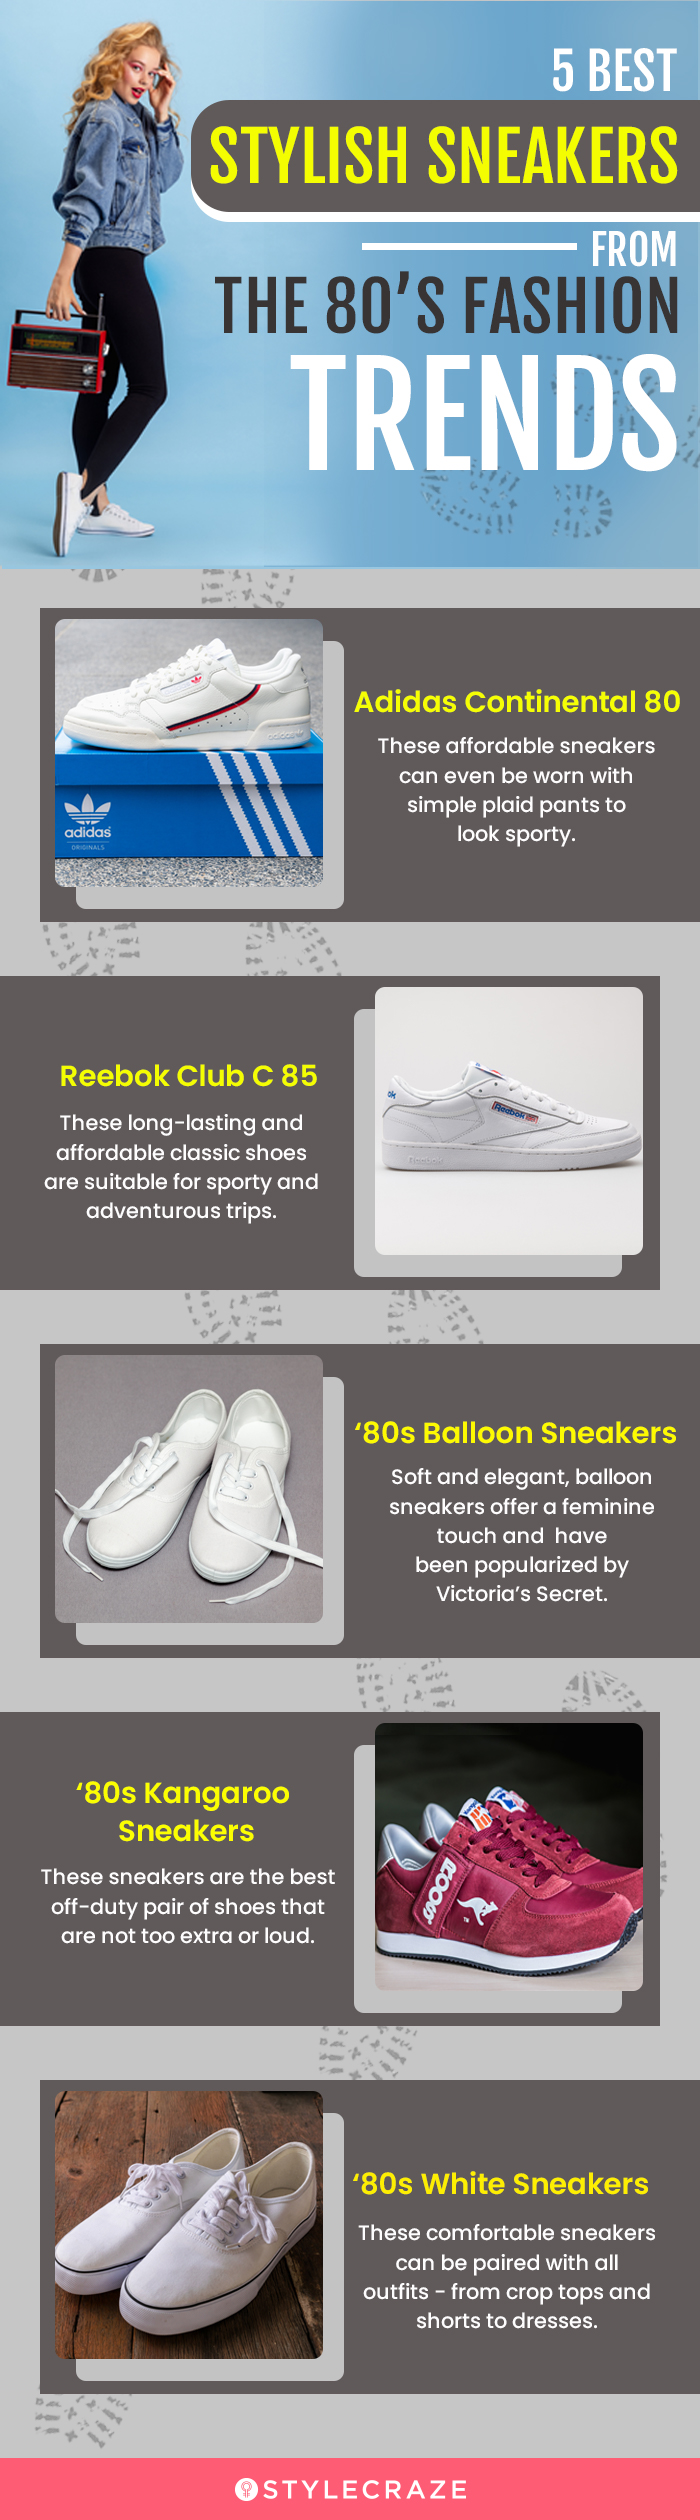 best 5 stylish sneakers from the 80s fashion trends (infographic)